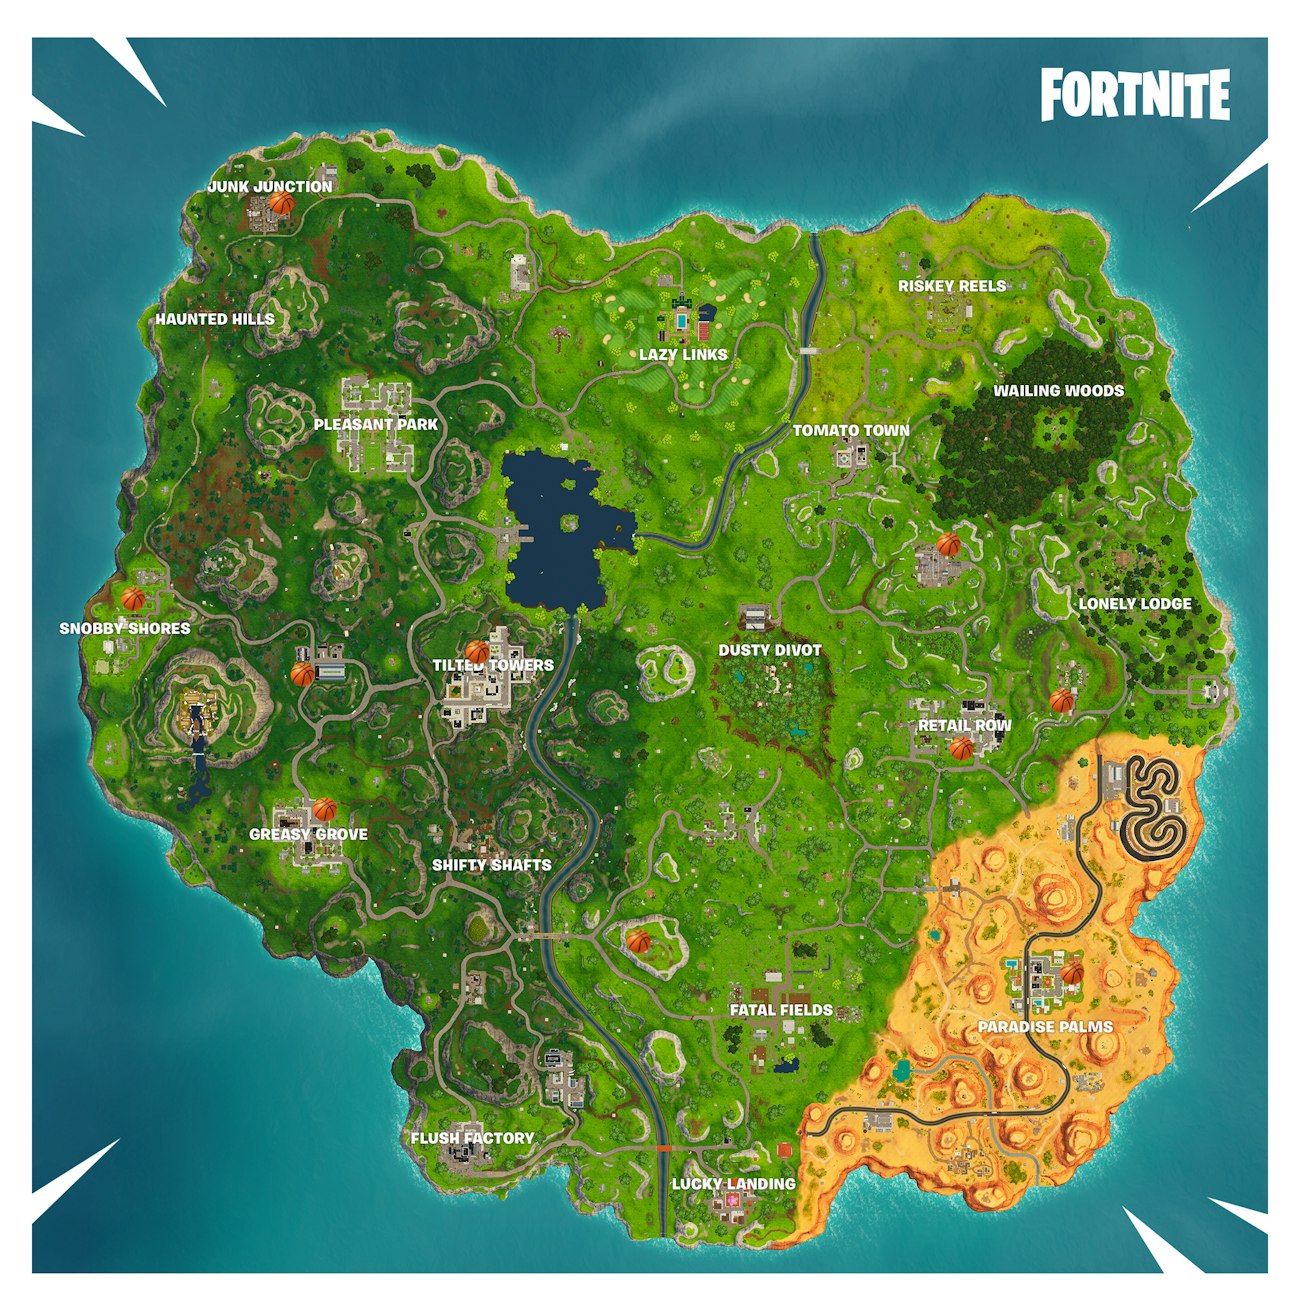 Basketball Hoops Fortnite All The Locations In One Map For Week 2 - here are nine of the known basketball hoops currently in fortnite battle royale